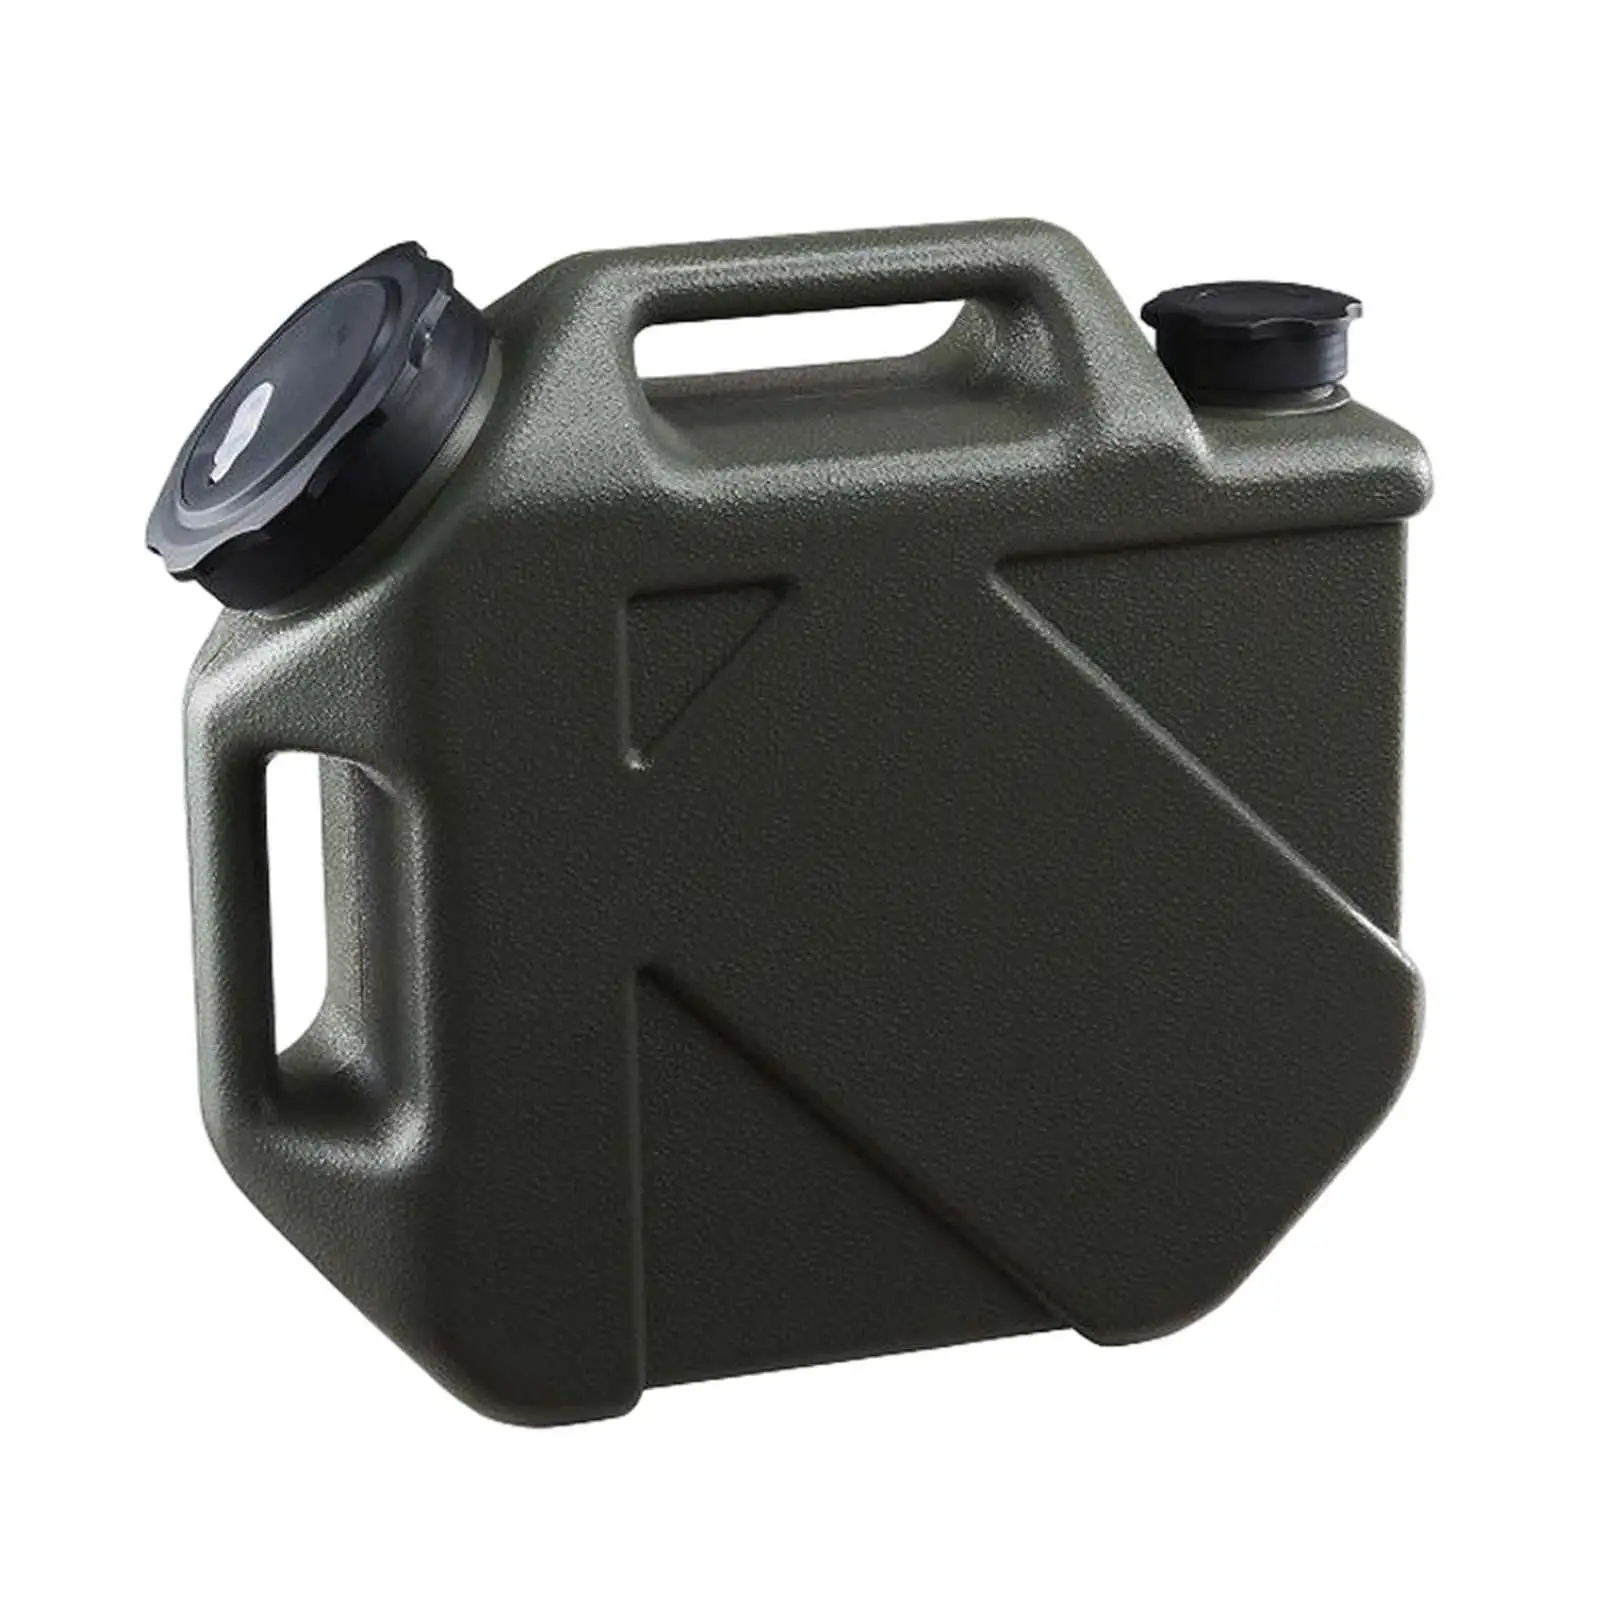 Portable Water Storage Tank 10L/2.64 Gallon Water Tank Container Large Capacity